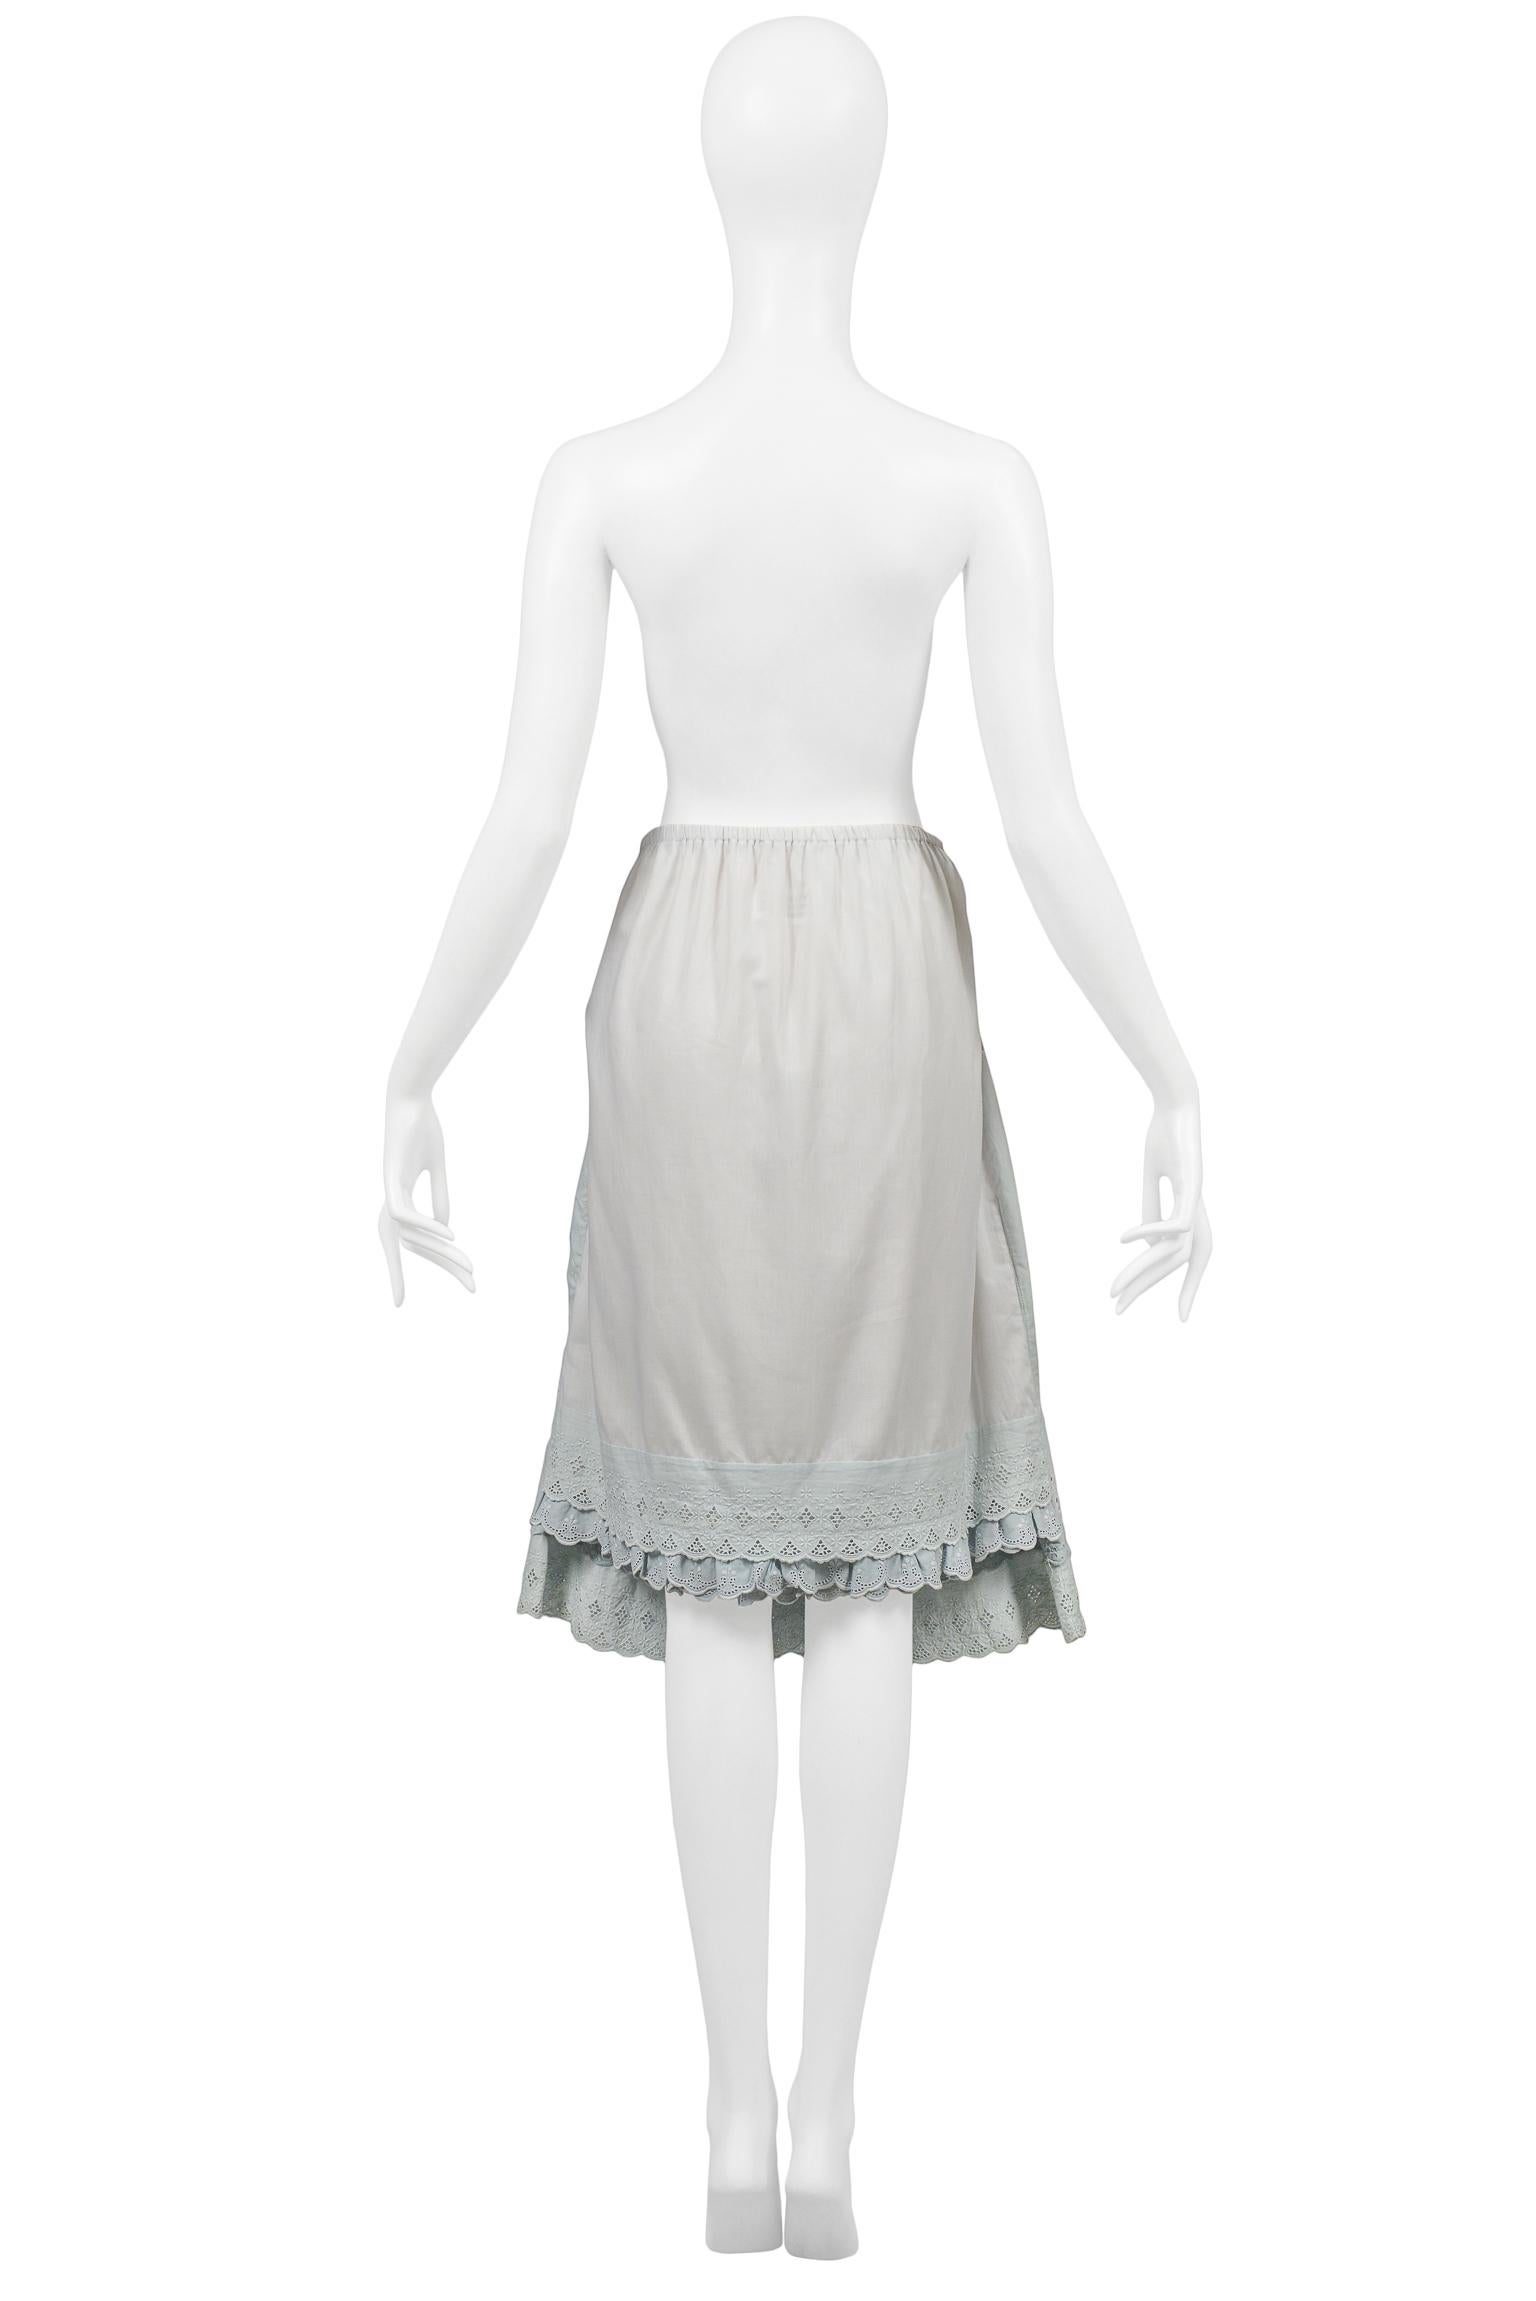 Maison Martin Margiela Artisanal Eyelet High Low Skirt 2004  In Excellent Condition In Los Angeles, CA